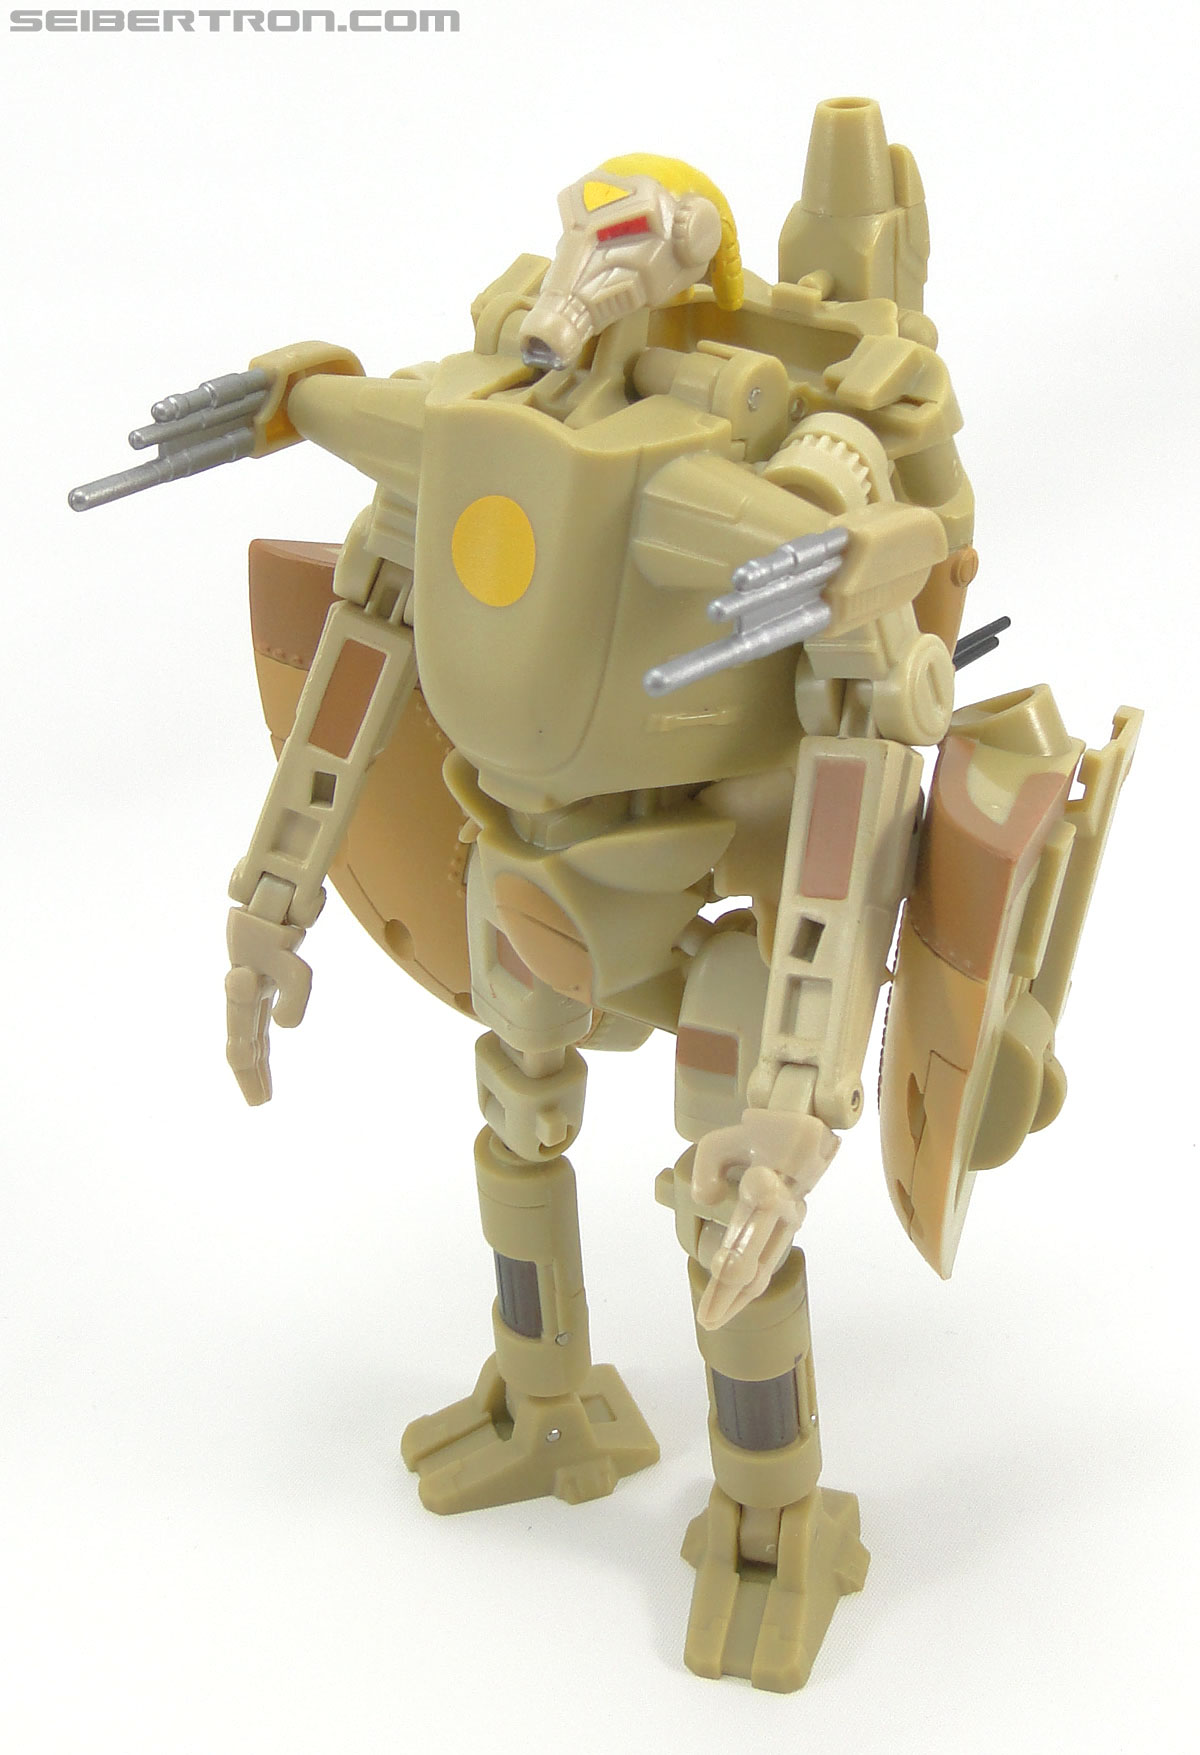 Star Wars Transformers Battle Droid Commader (Armored Assault Tank) (Battle Droid Commader) (Image #48 of 85)